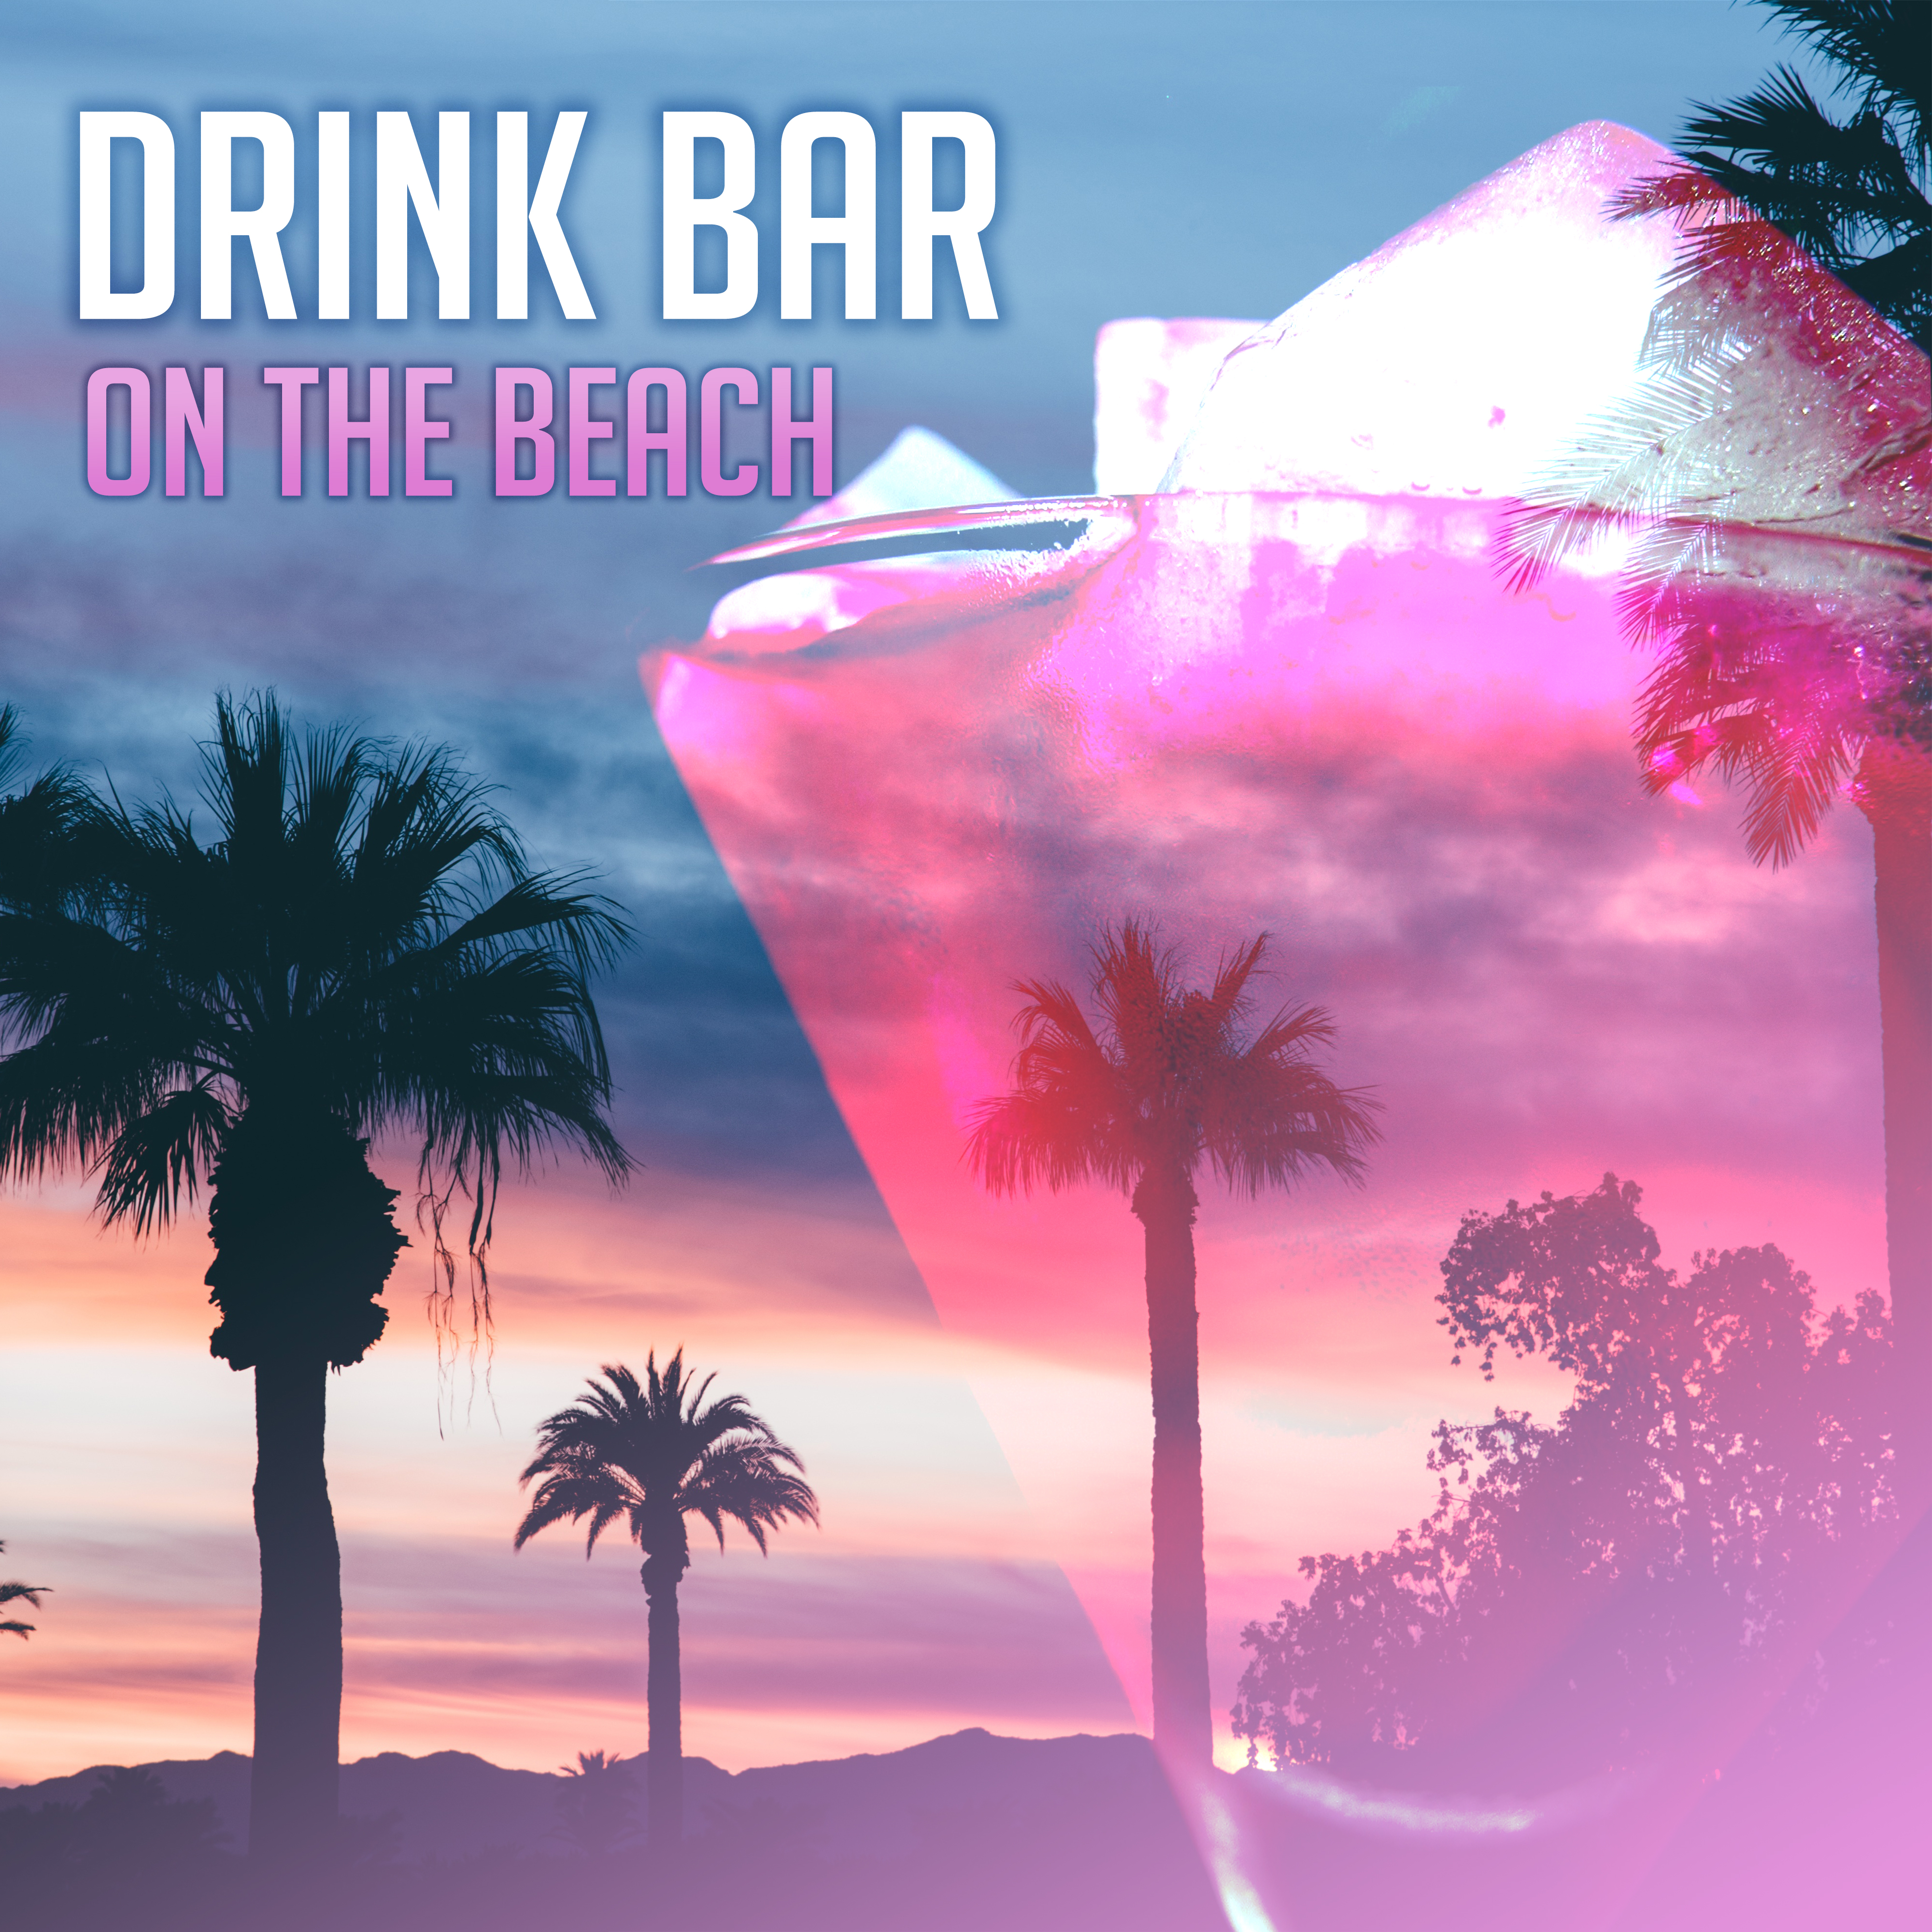 Drink Bar on the Beach – Total Relax, Colorful Drinks, Beach Chill, Holiday Songs, Summertime 2017, Rest Under Palms